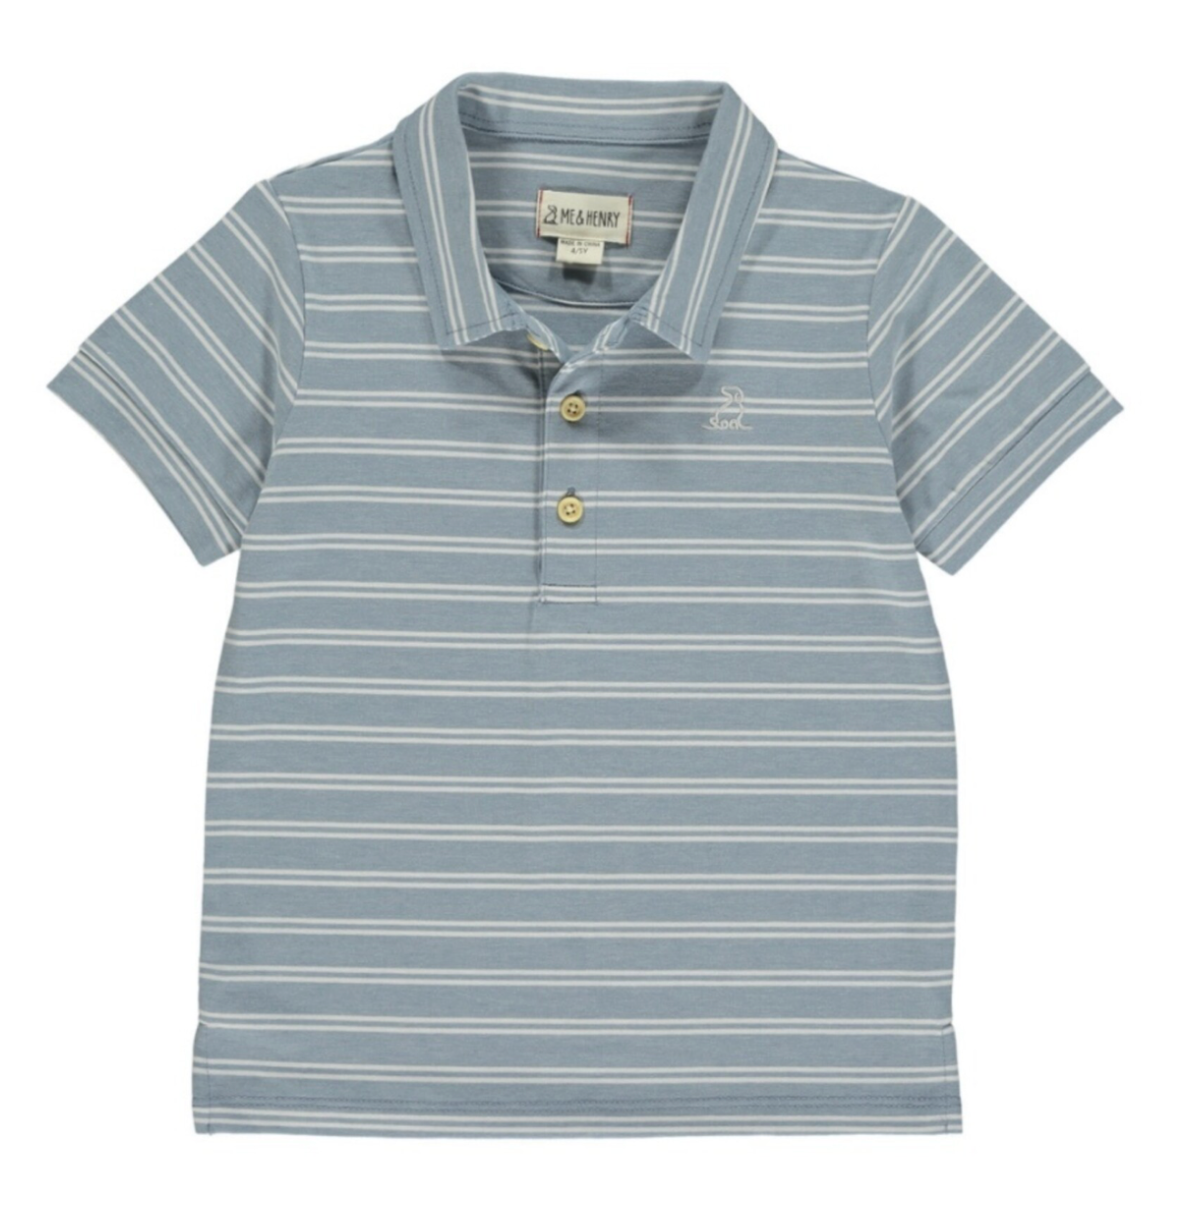 Starboard Polo (Kid)